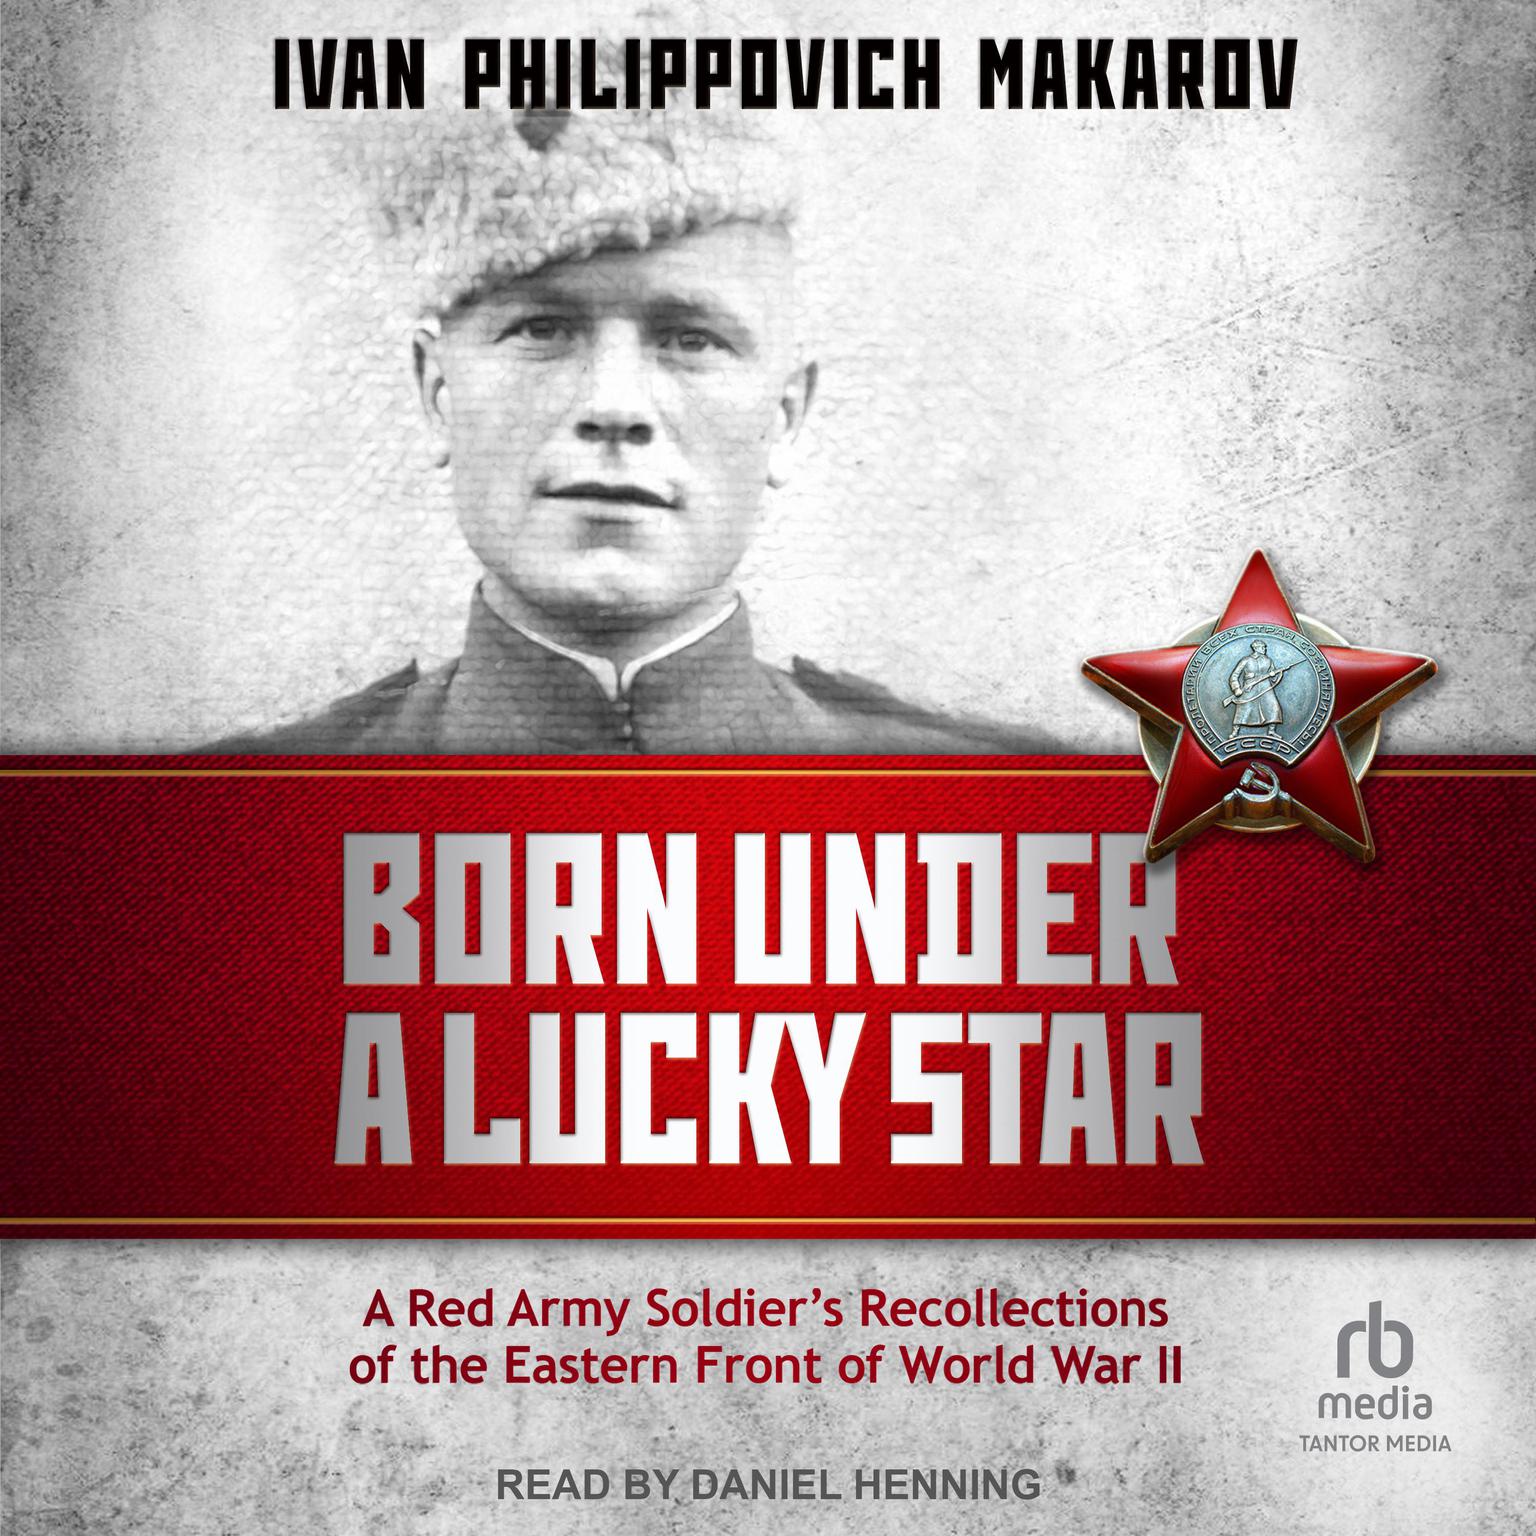 Born Under a Lucky Star: A Red Army Soldiers Recollections of the Eastern Front of World War II Audiobook, by Ivan Philippovich Makarov